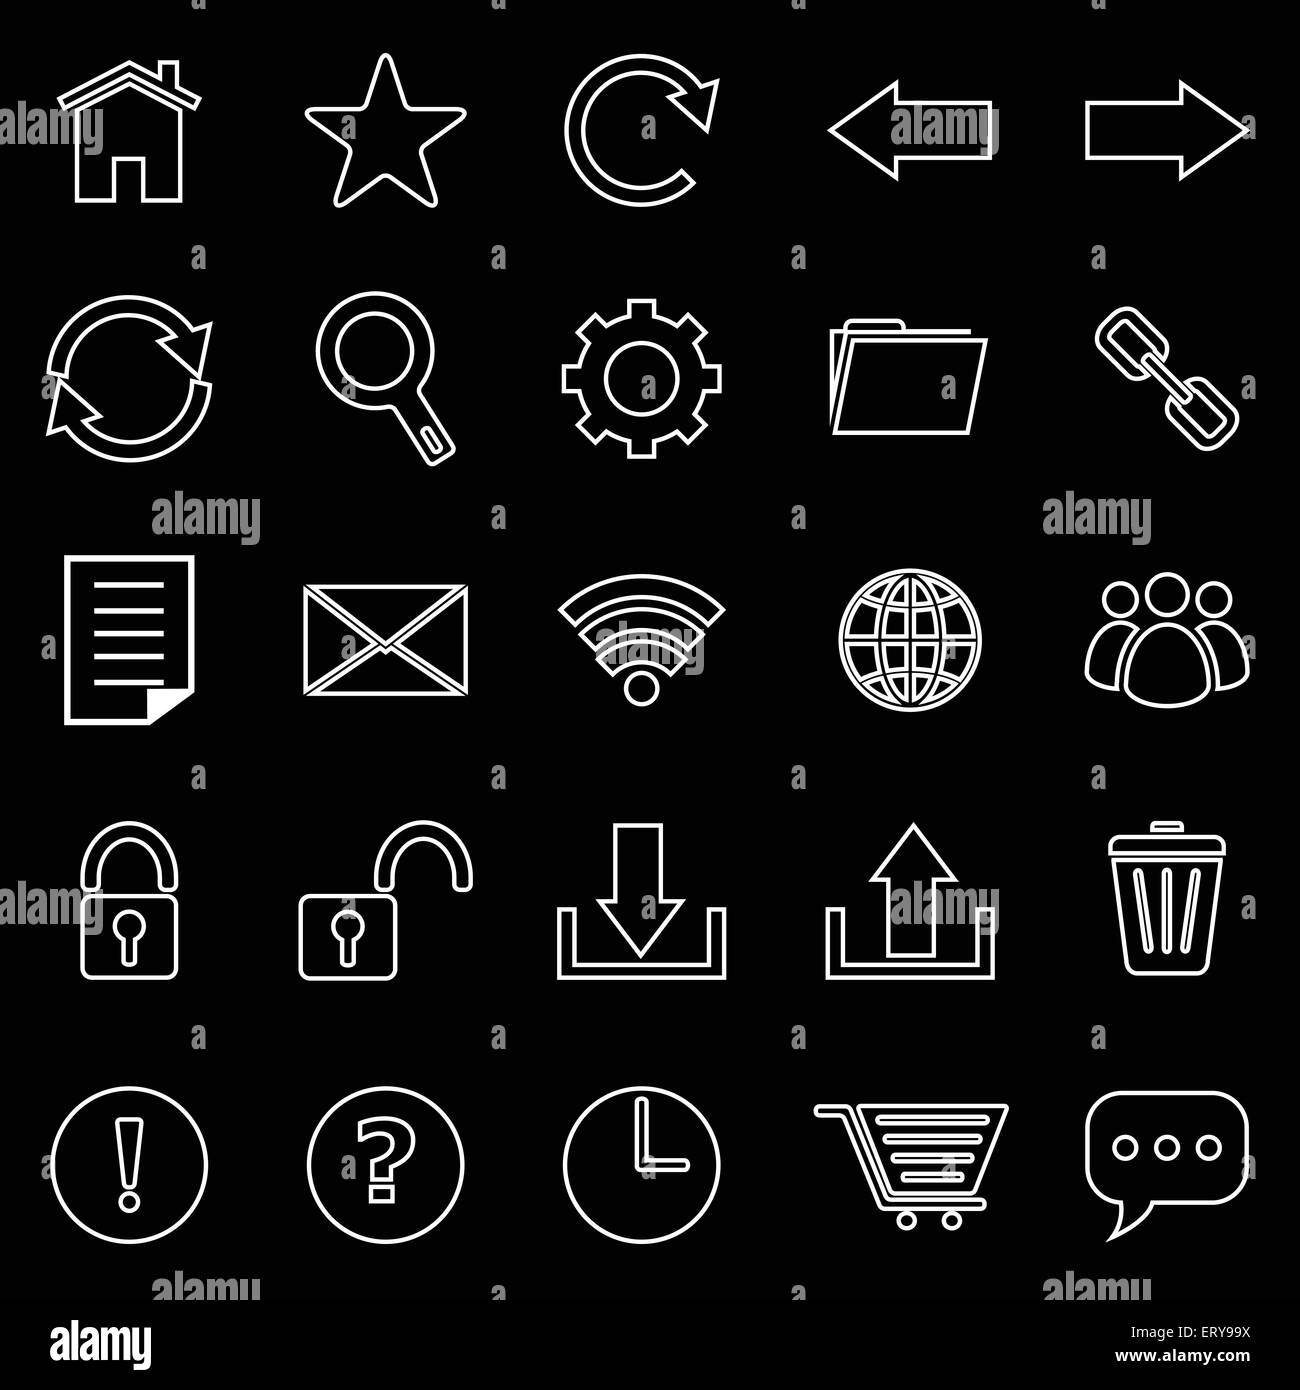 Tool bar line icons on black background, stock vector Stock Vector ...